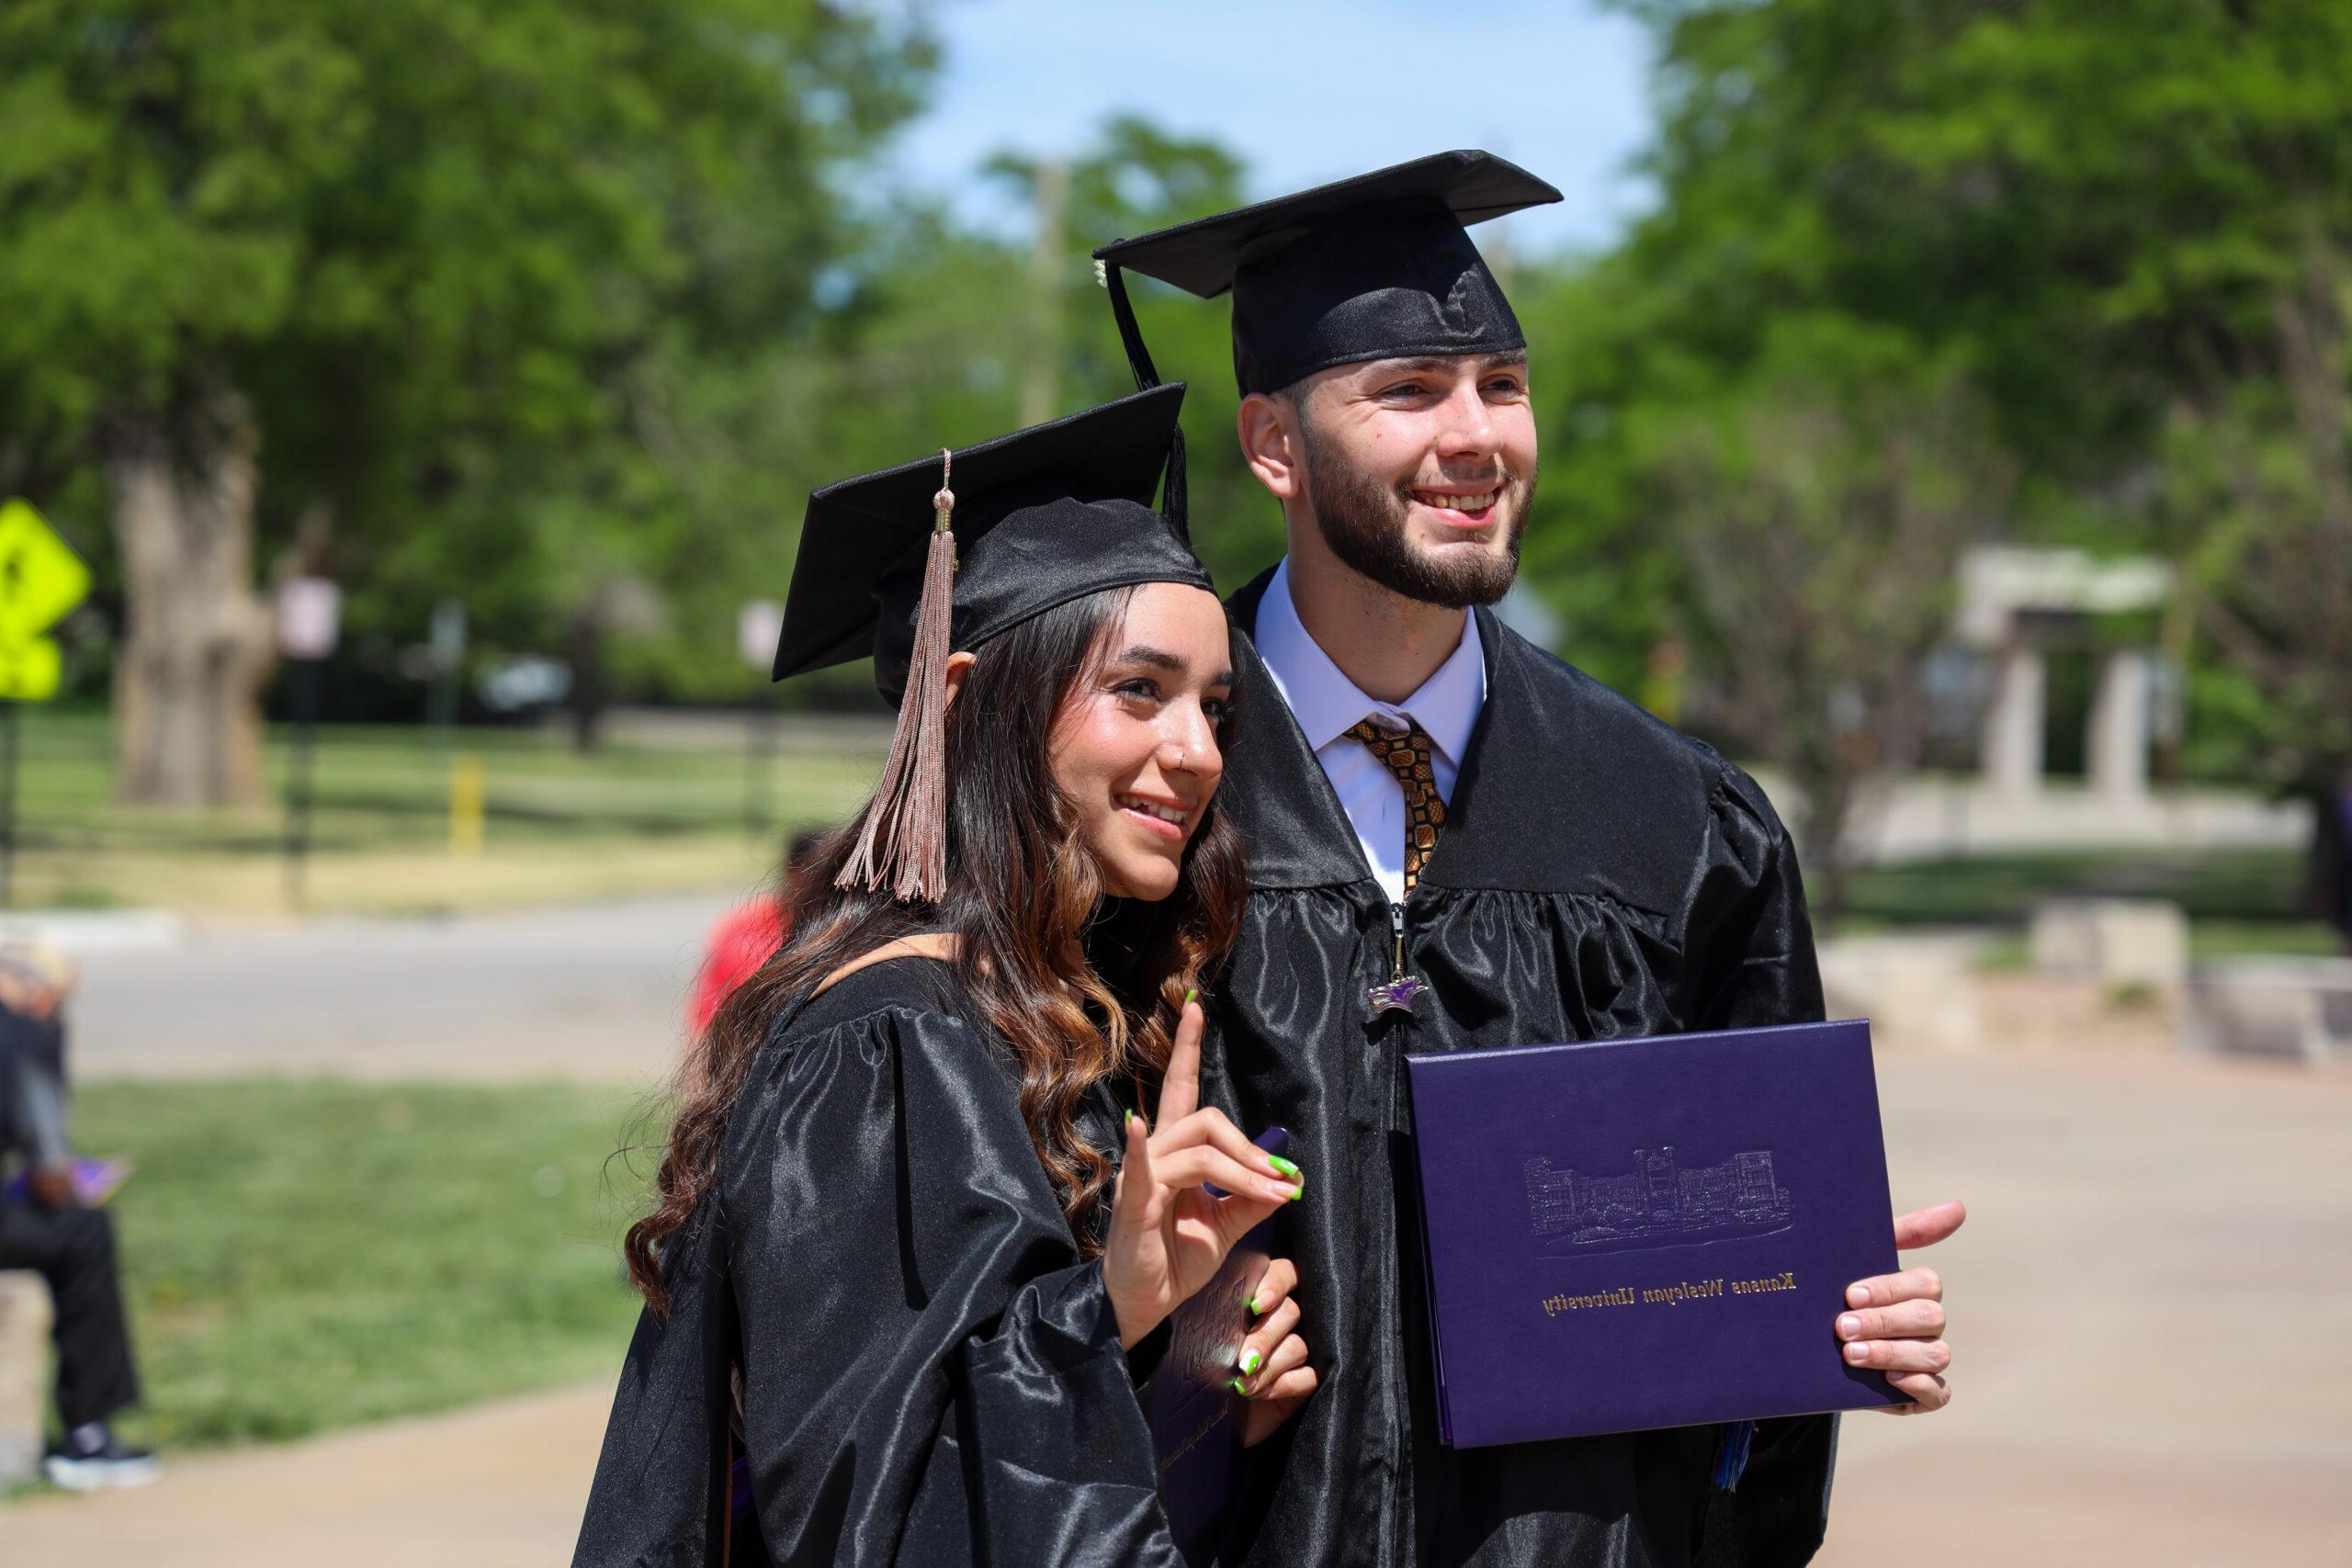 Man and woman in graduation gear